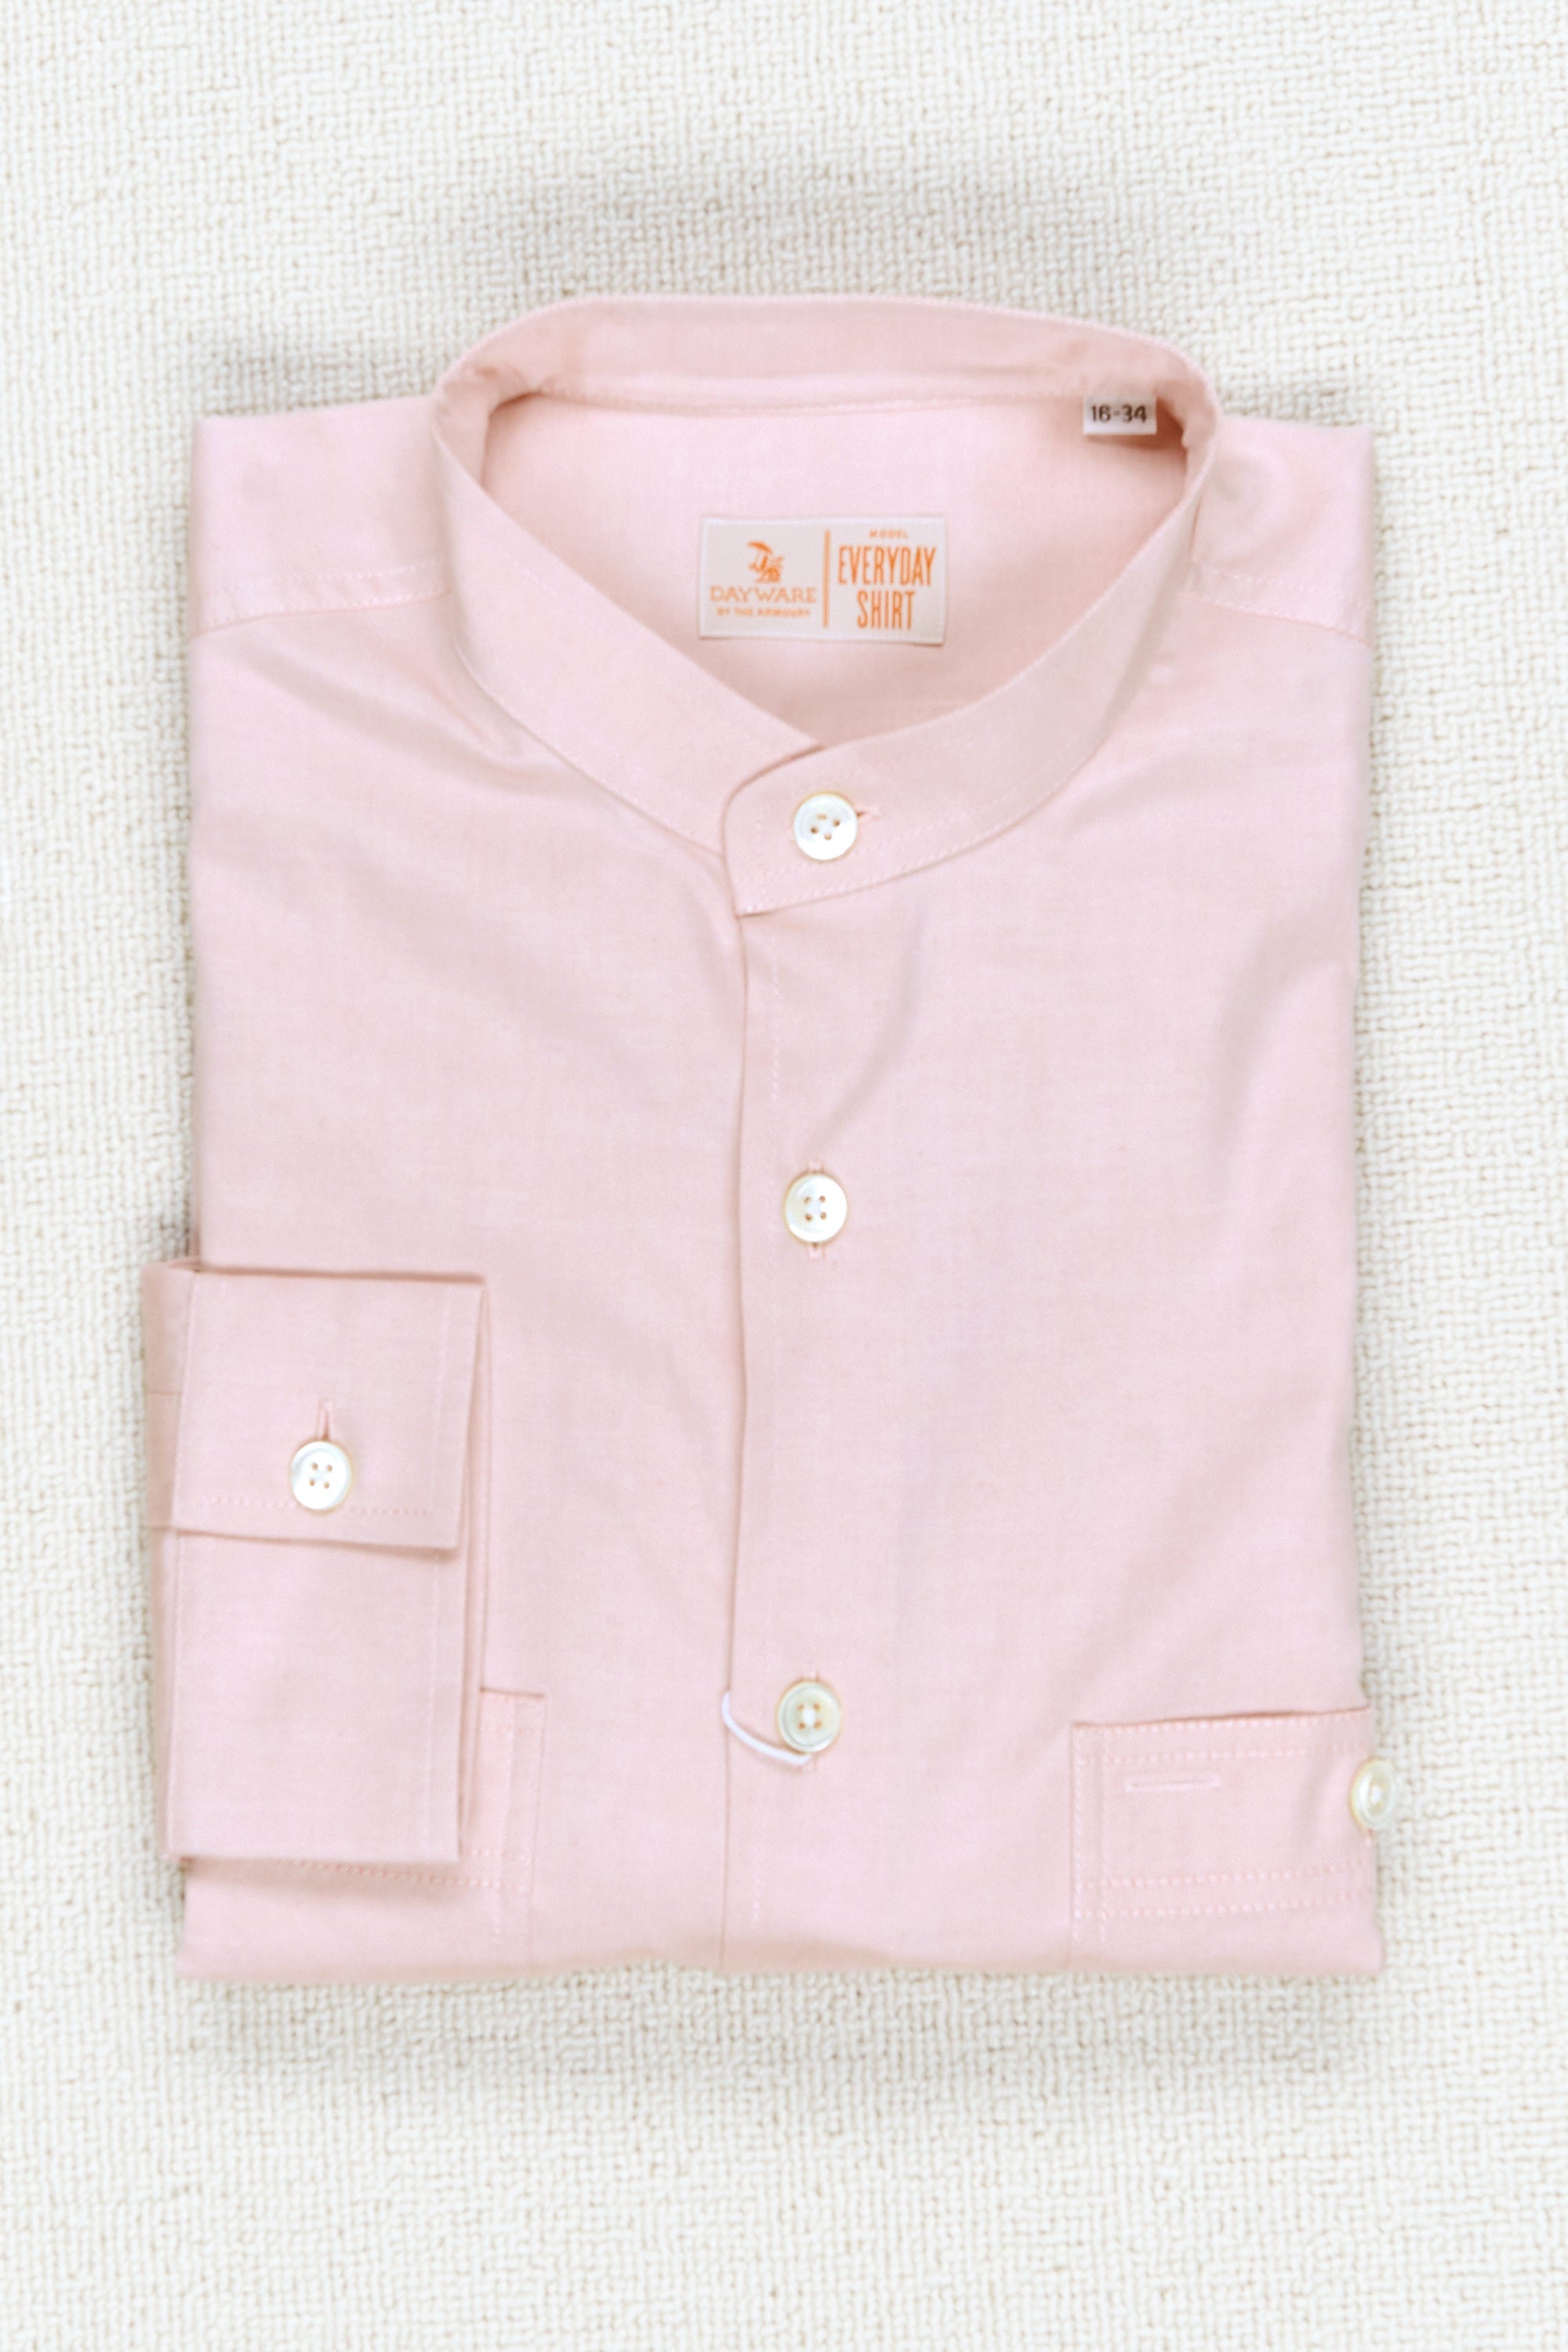 The Armoury Pink Cotton Everyday Shirt